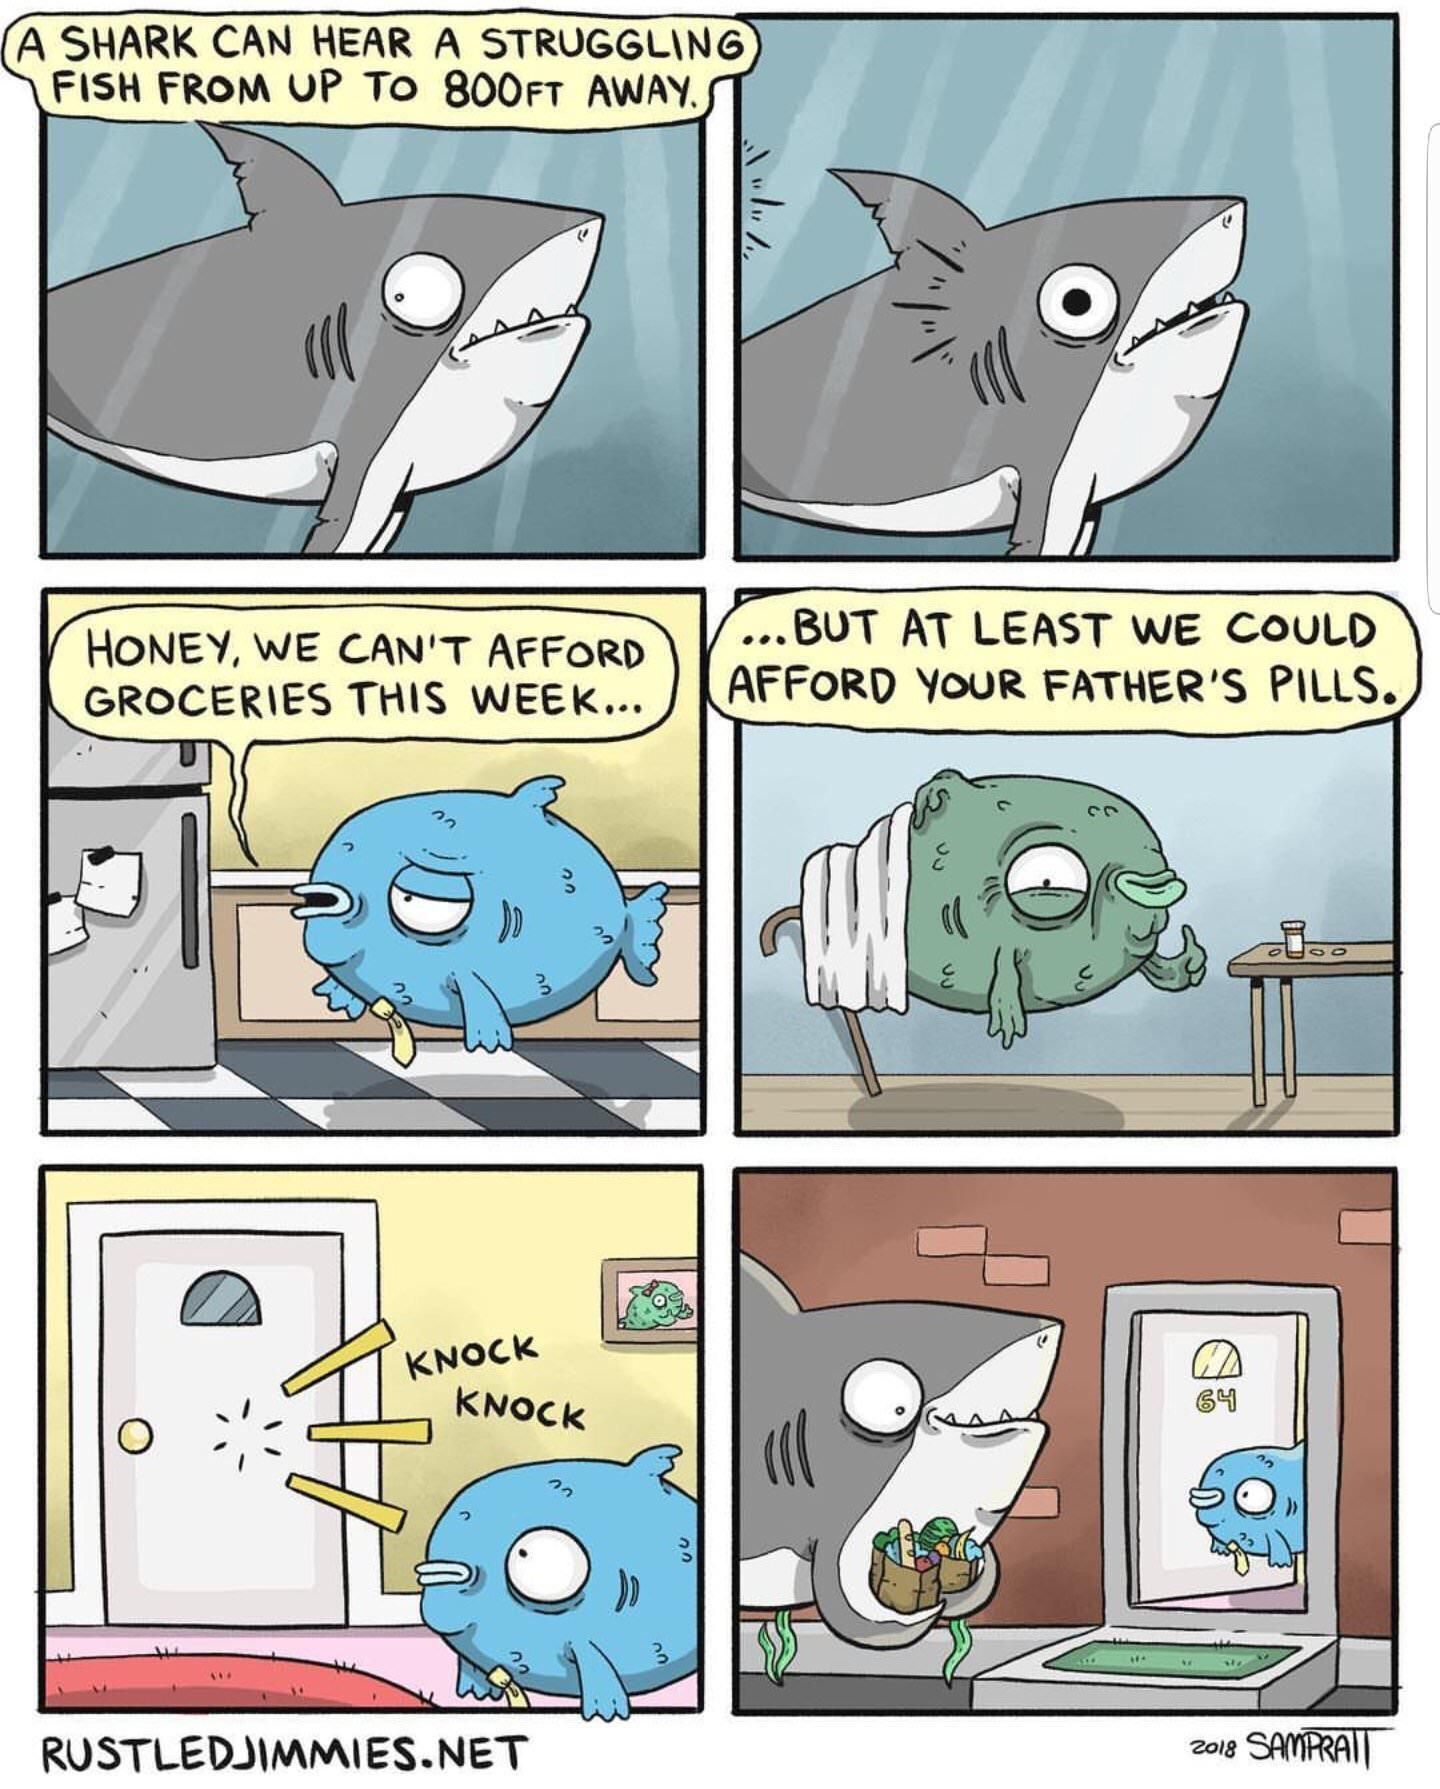 Wholesome shark